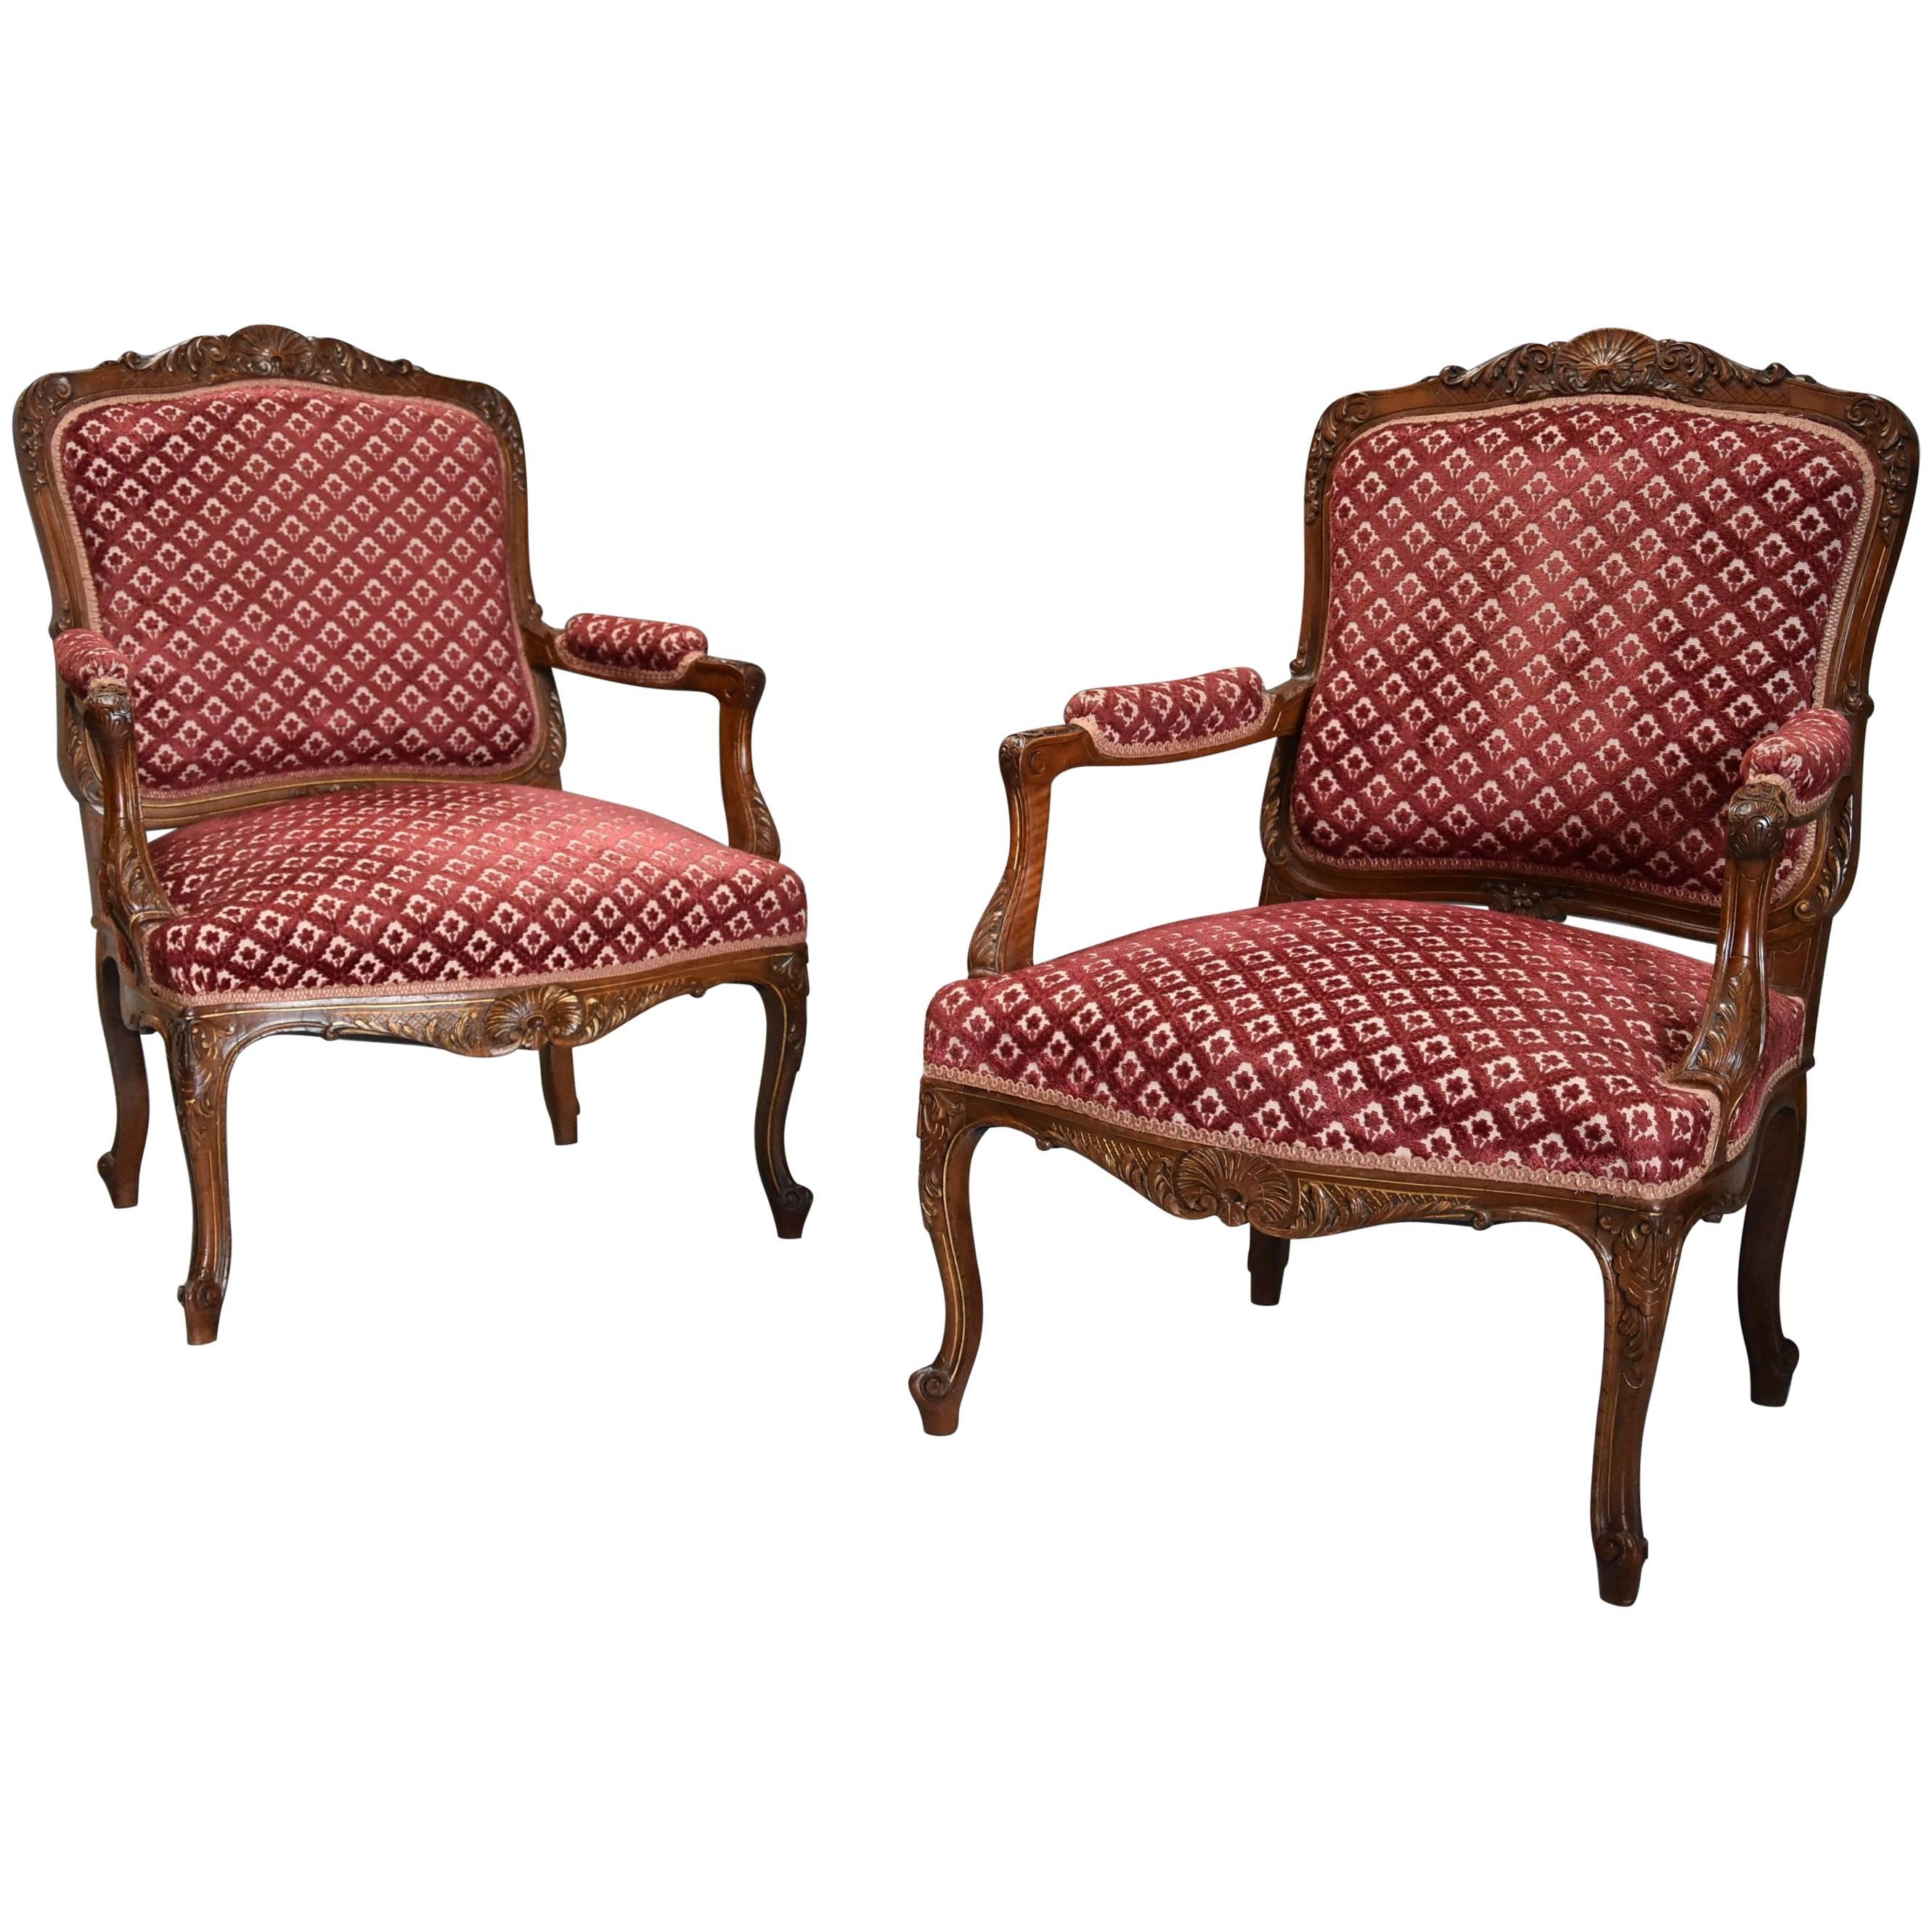 Pair of Late 19th Century French Walnut Fauteuils, Open Armchairs in the Louis